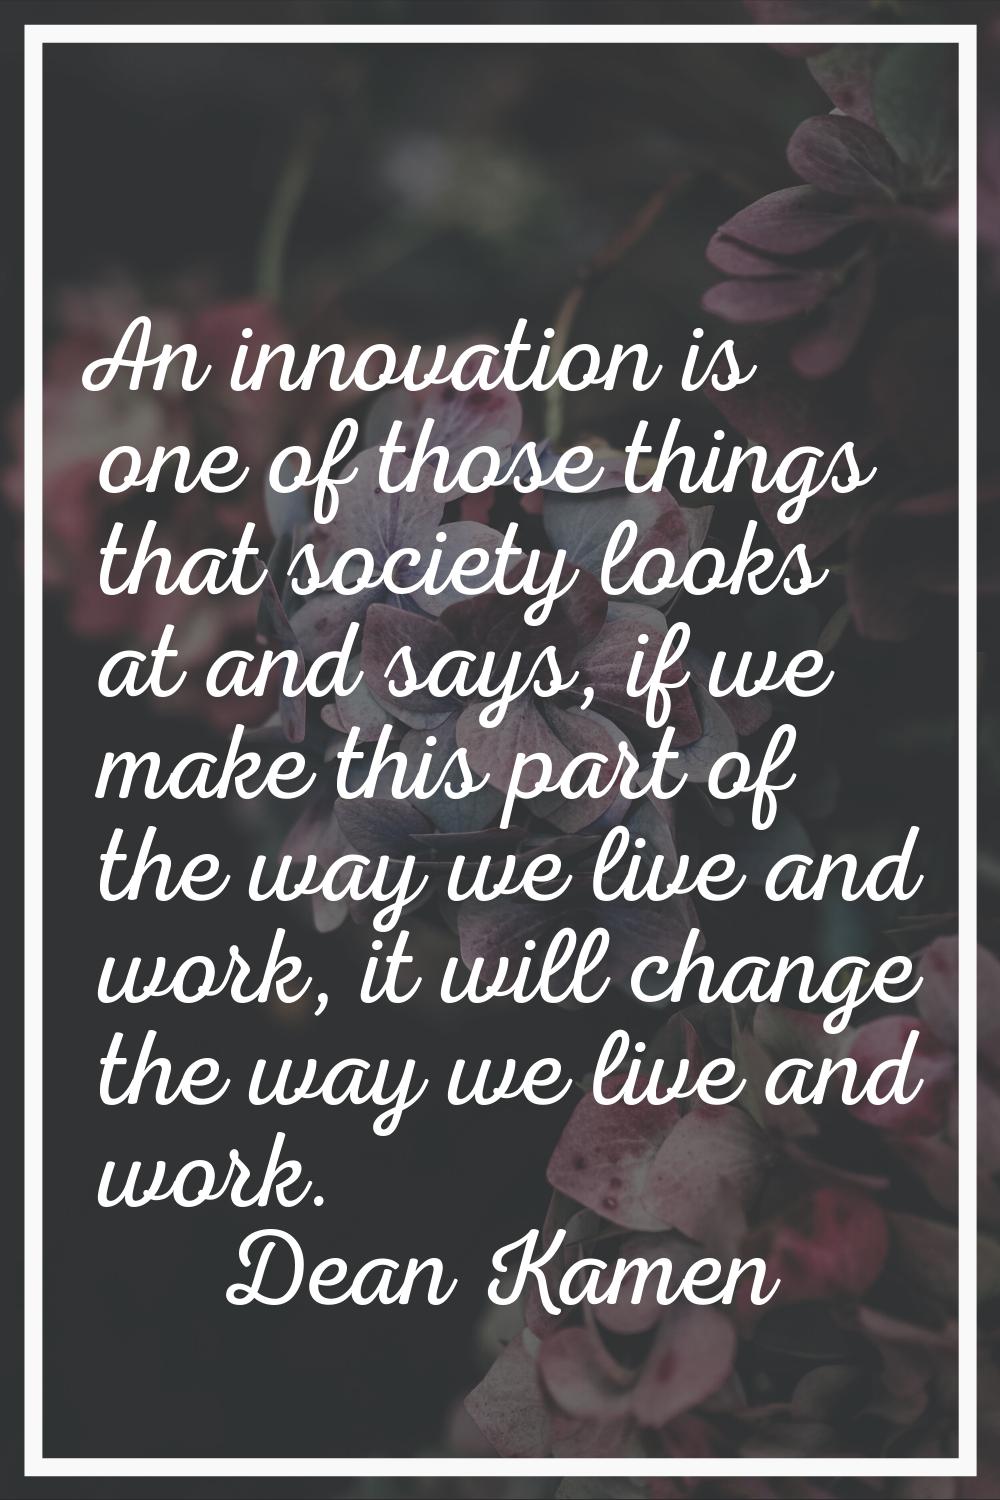 An innovation is one of those things that society looks at and says, if we make this part of the wa